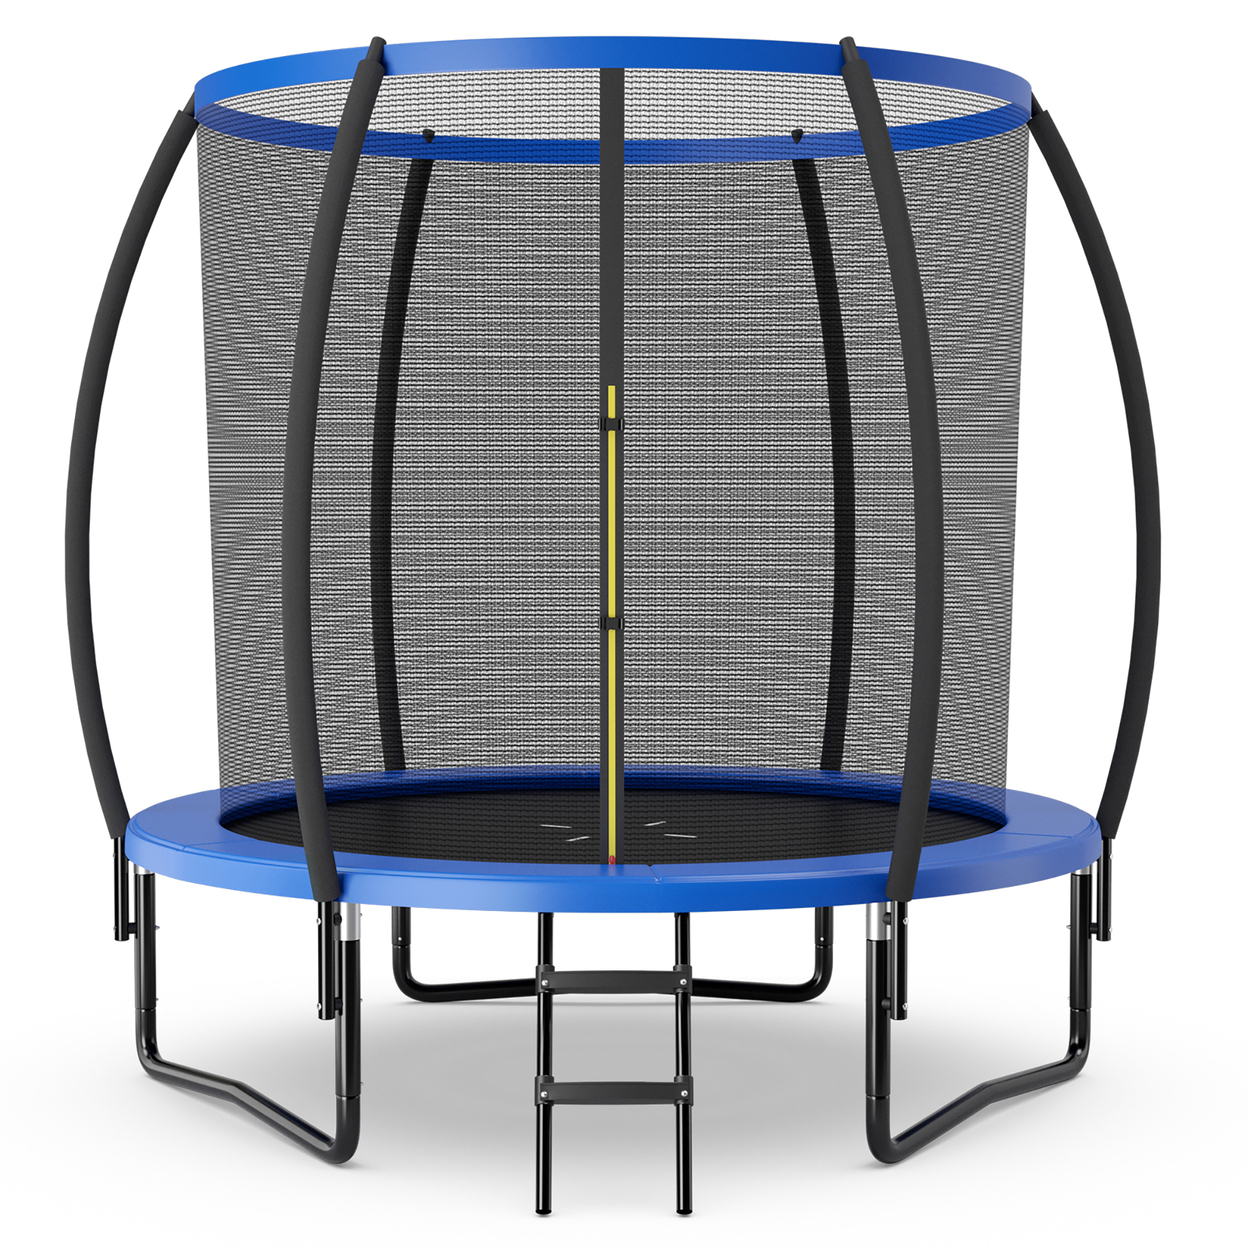 10FT Recreational Trampoline W/ Ladder Enclosure Net Safety Pad Outdoor - Blue